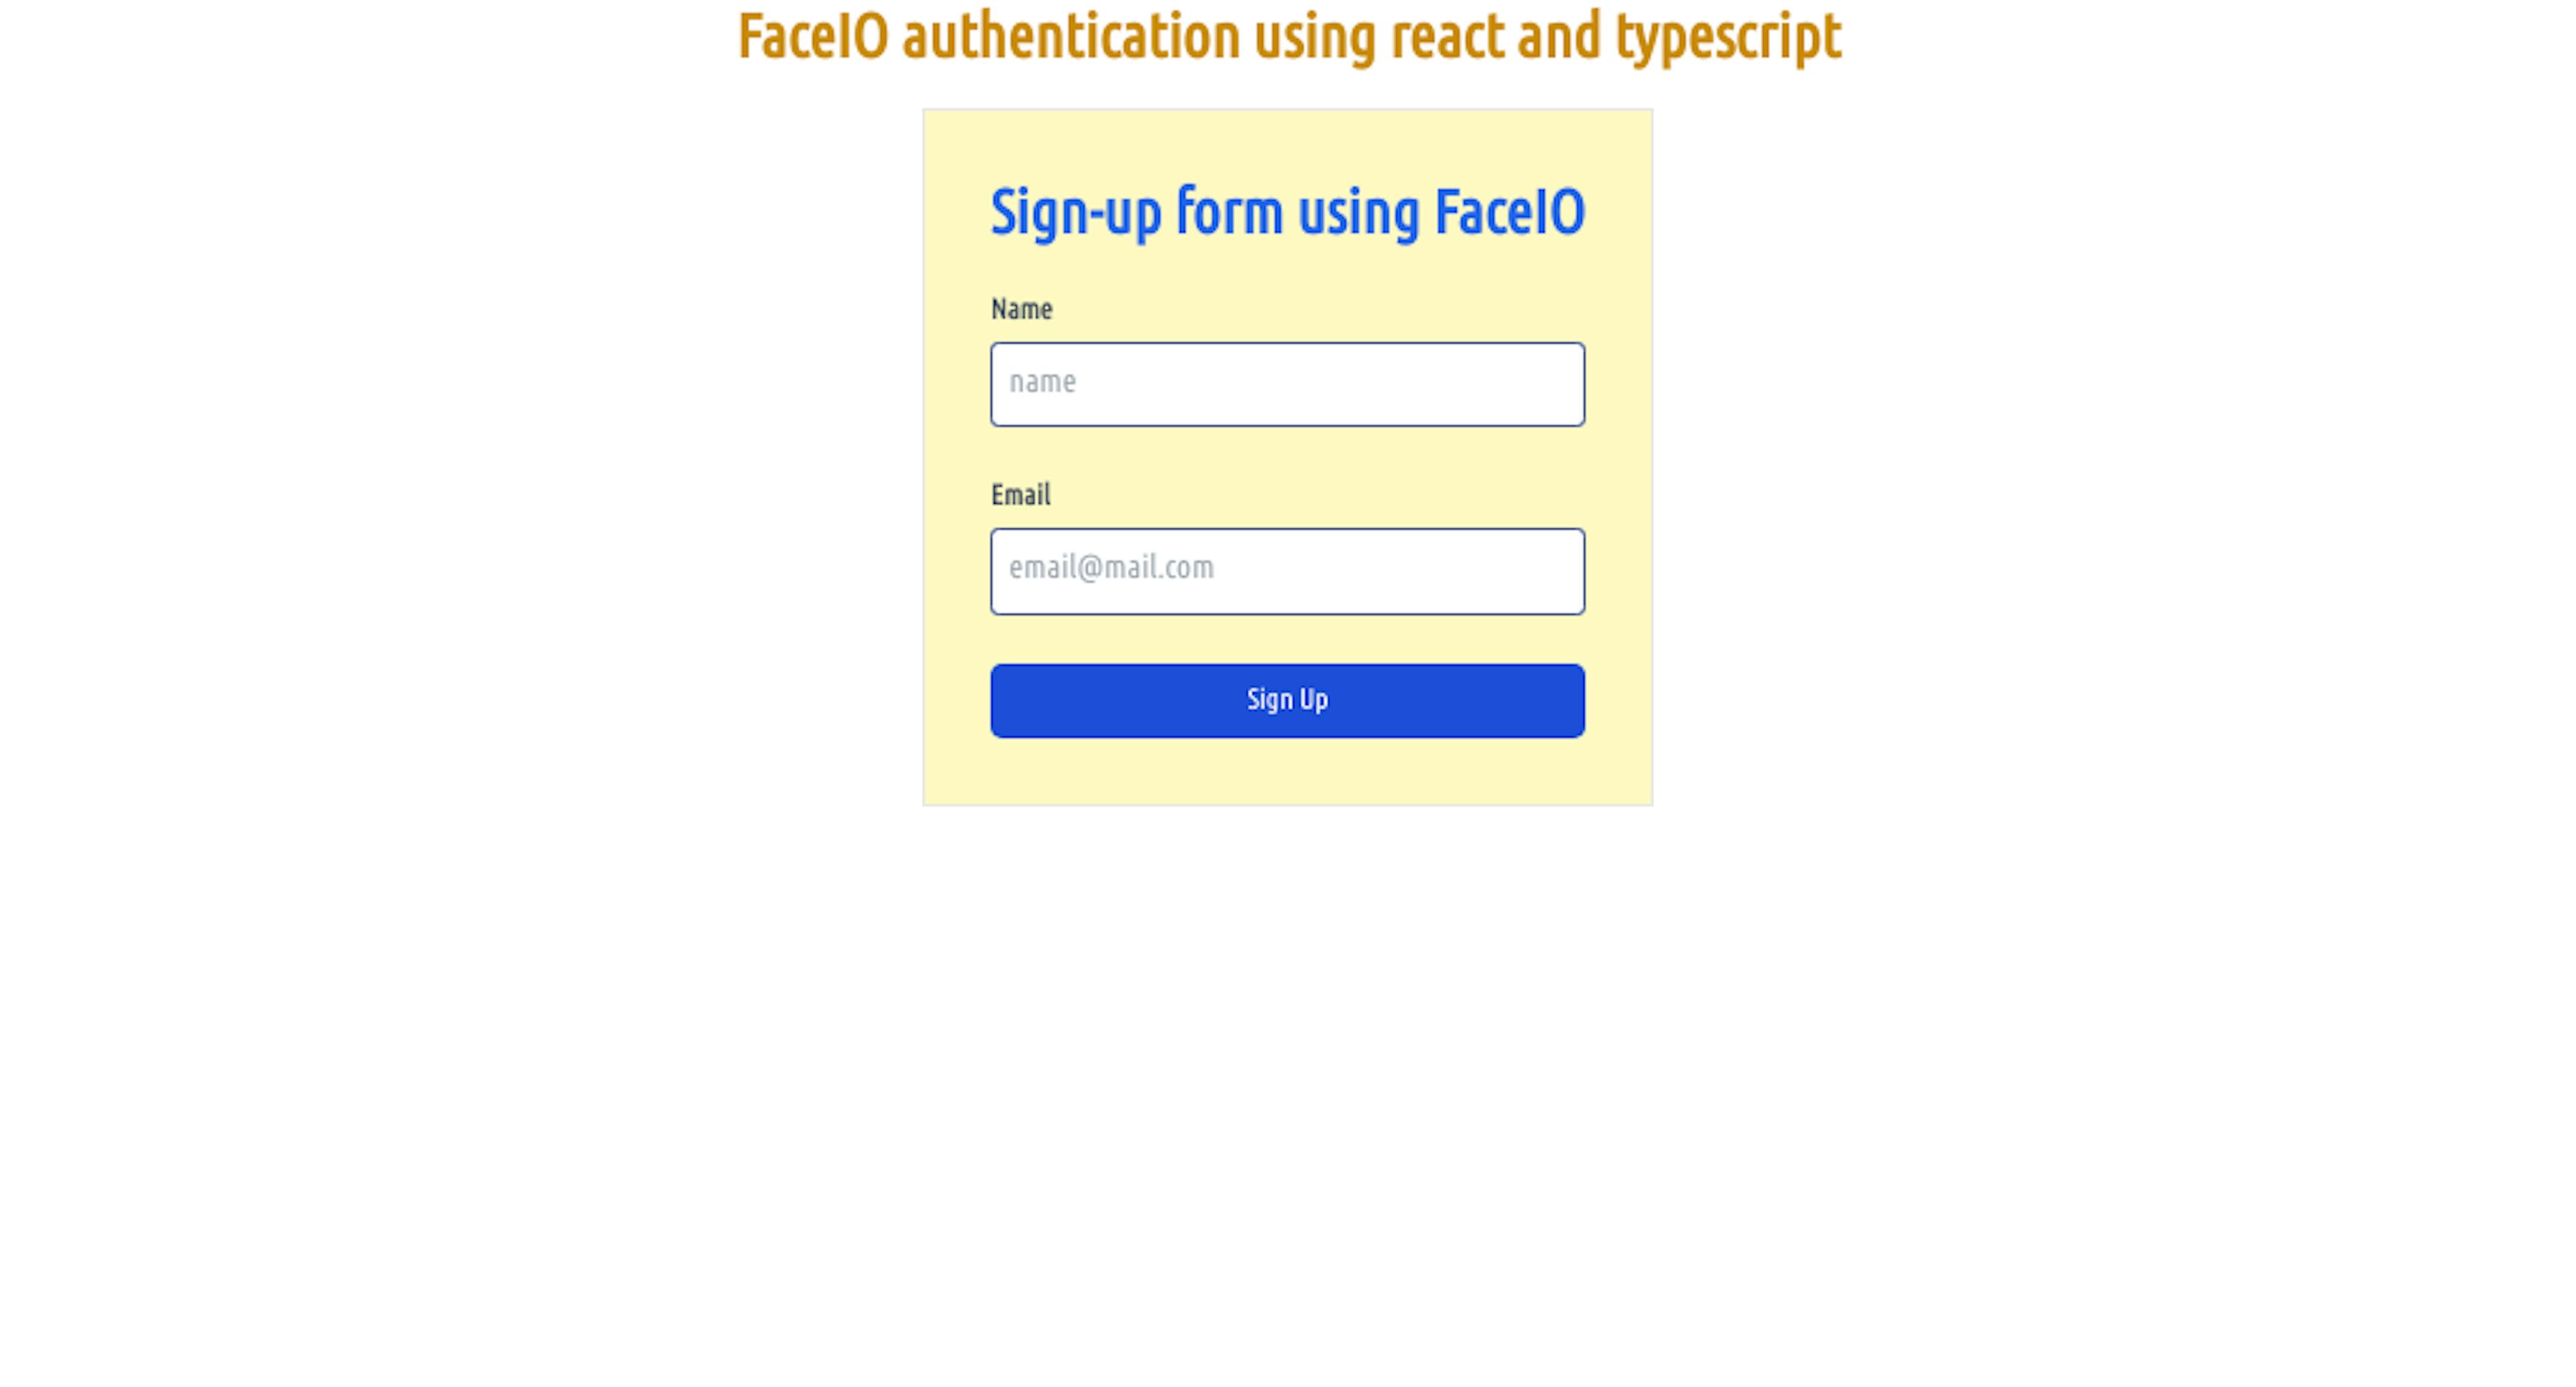 sign-up form using faceIO